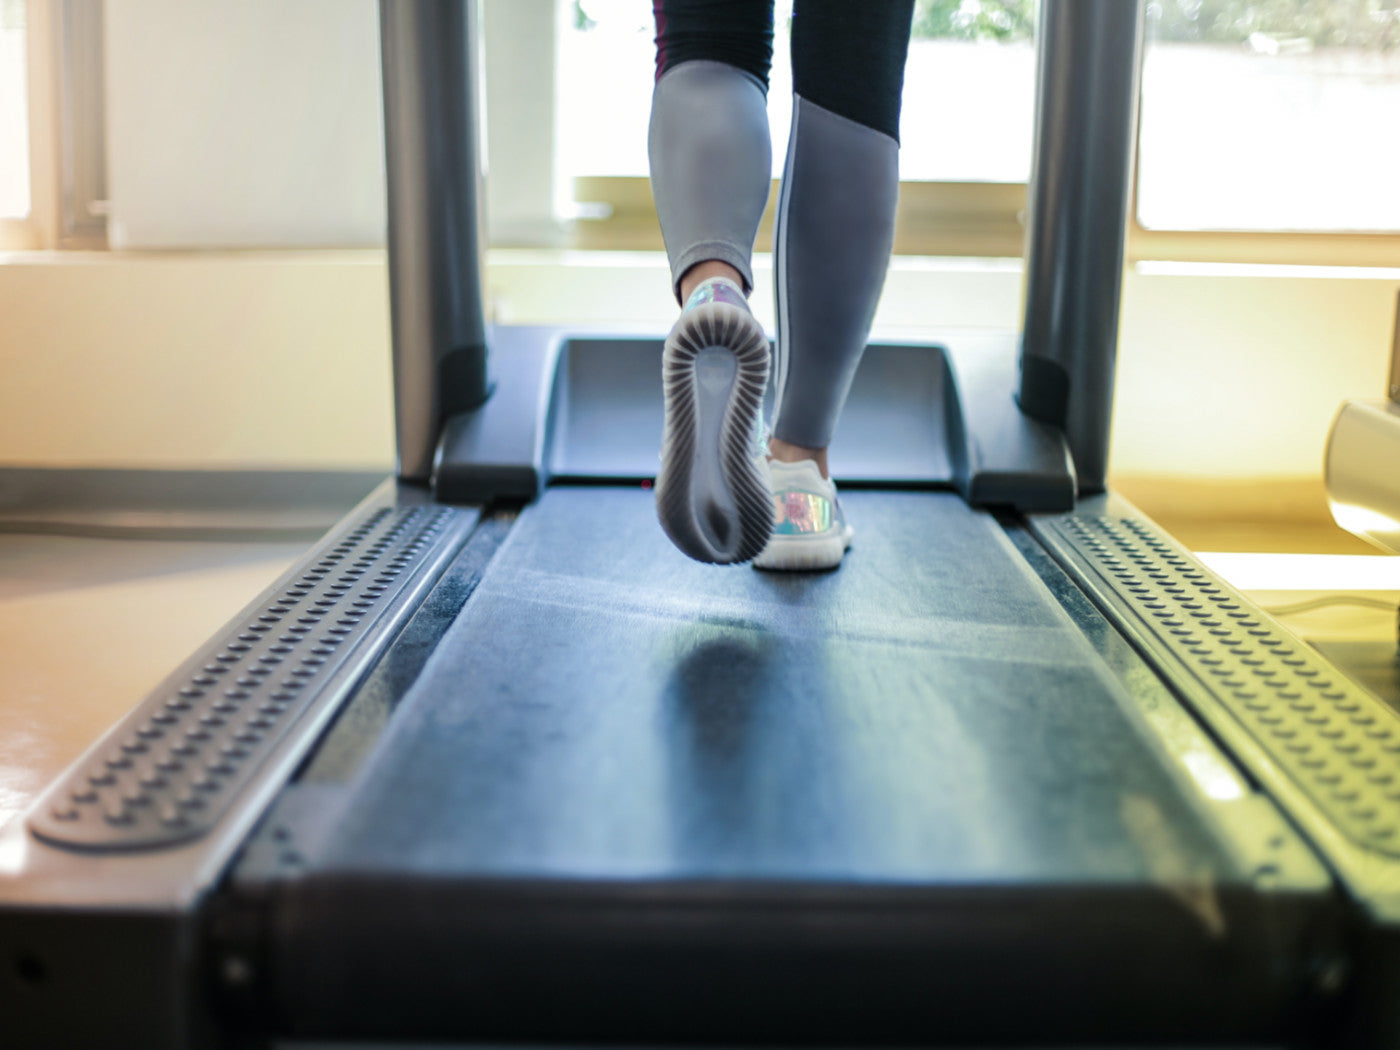 Can You Use VR While You Are On A Treadmill